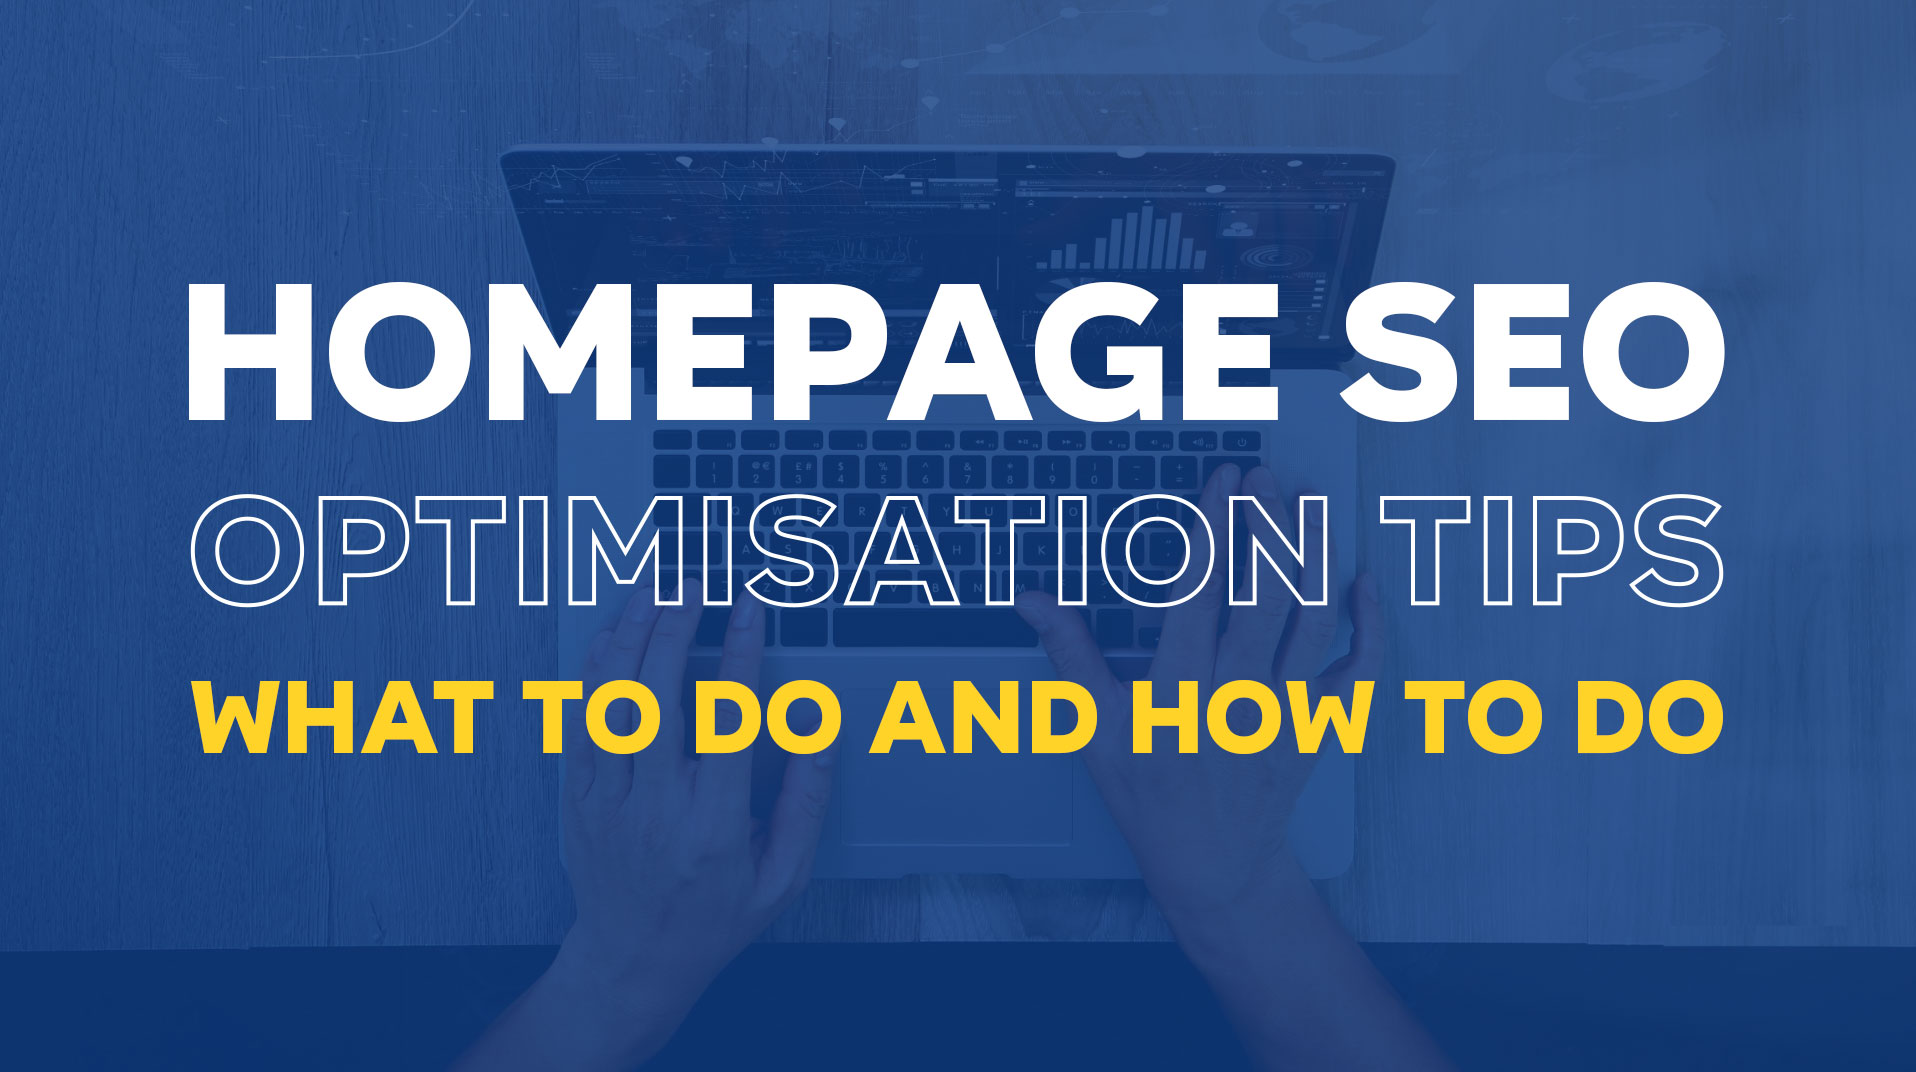 14 Steps to Optimise Your Website’s Homepage